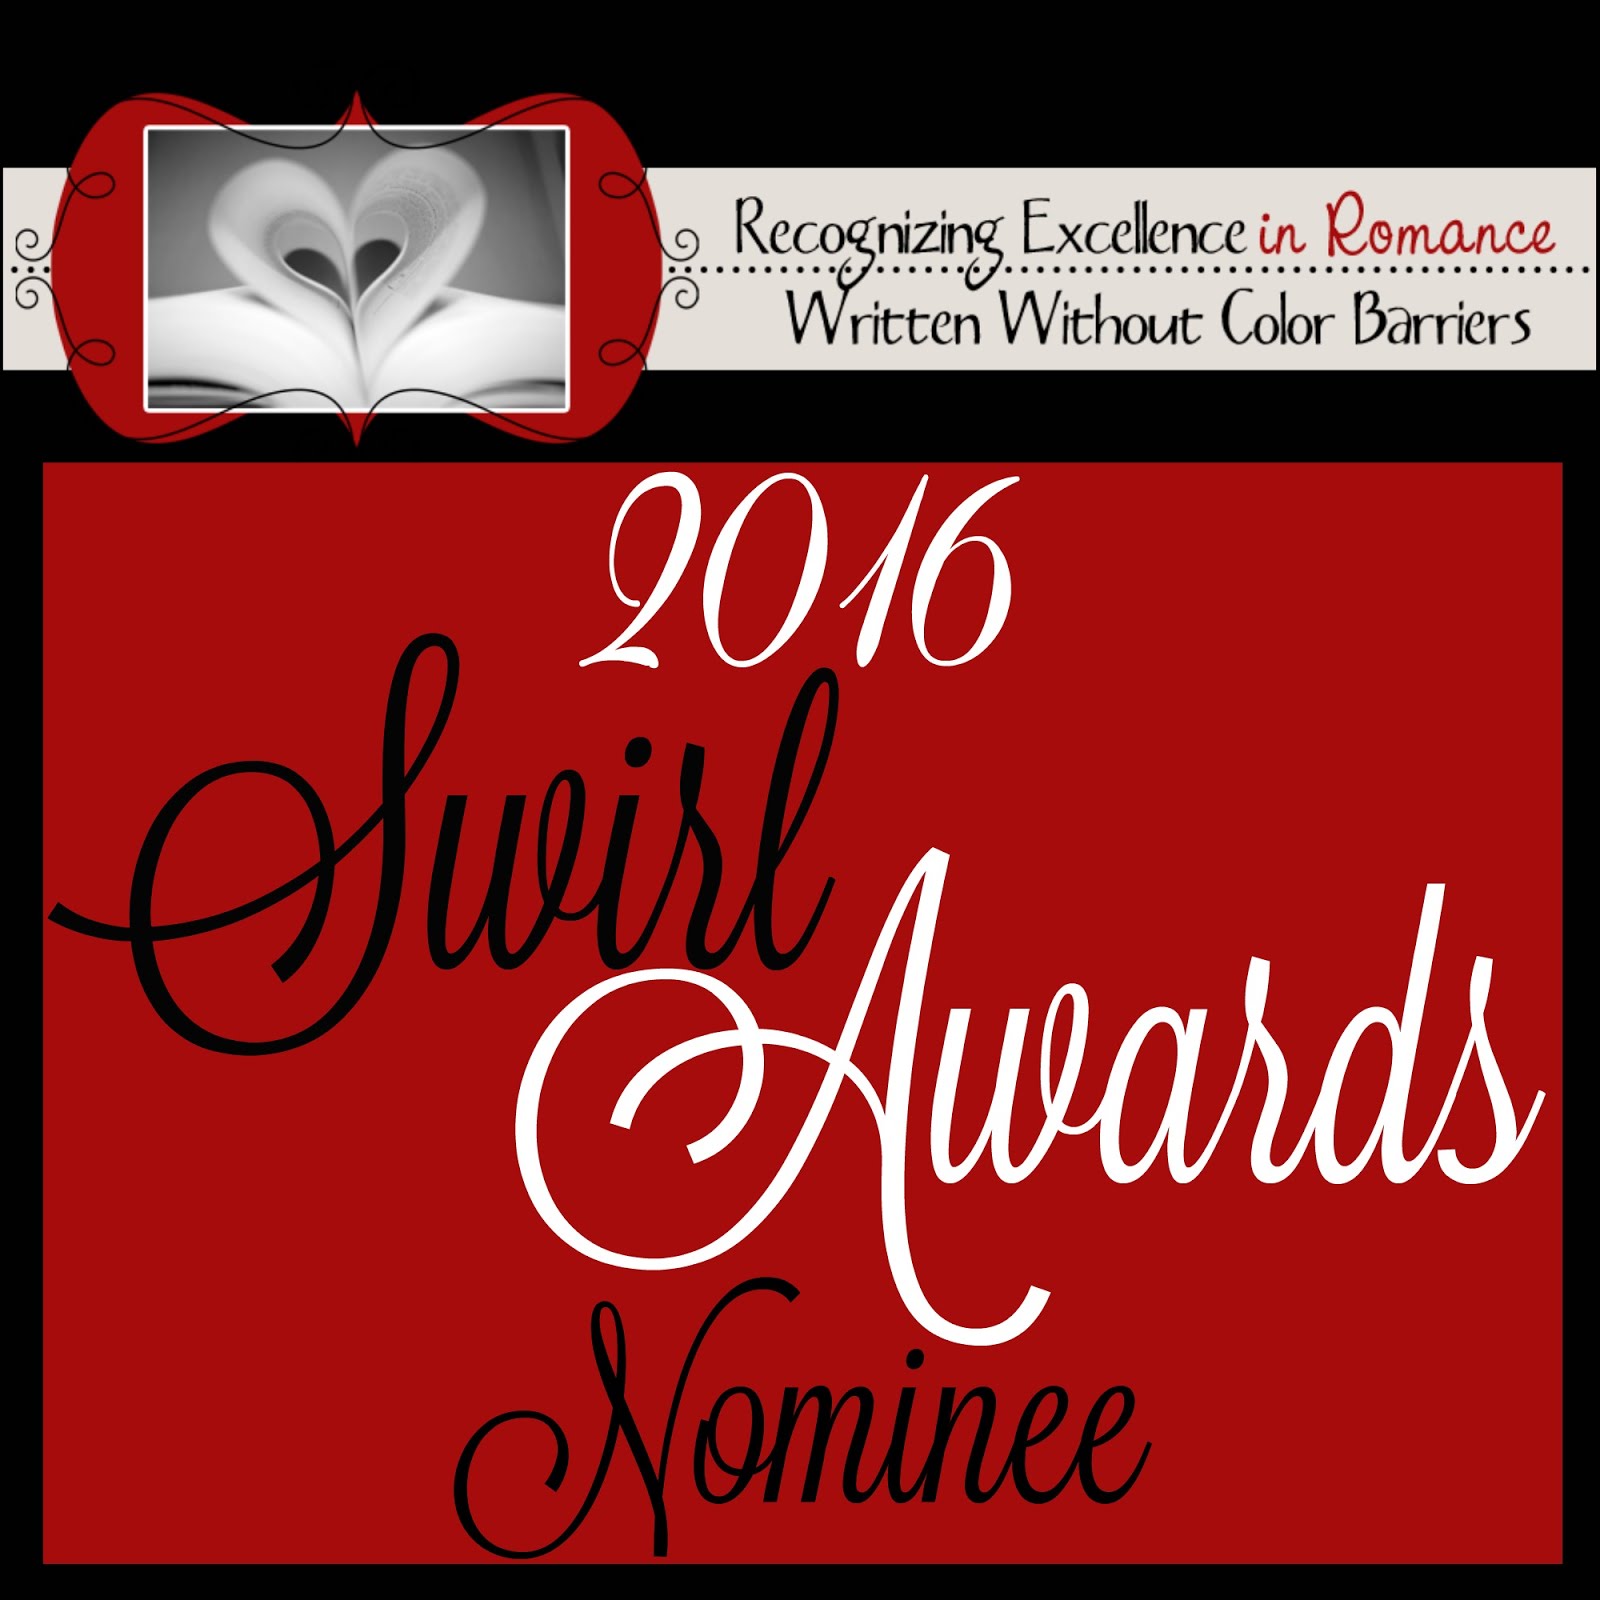 We're nominees for the Swirl Awards